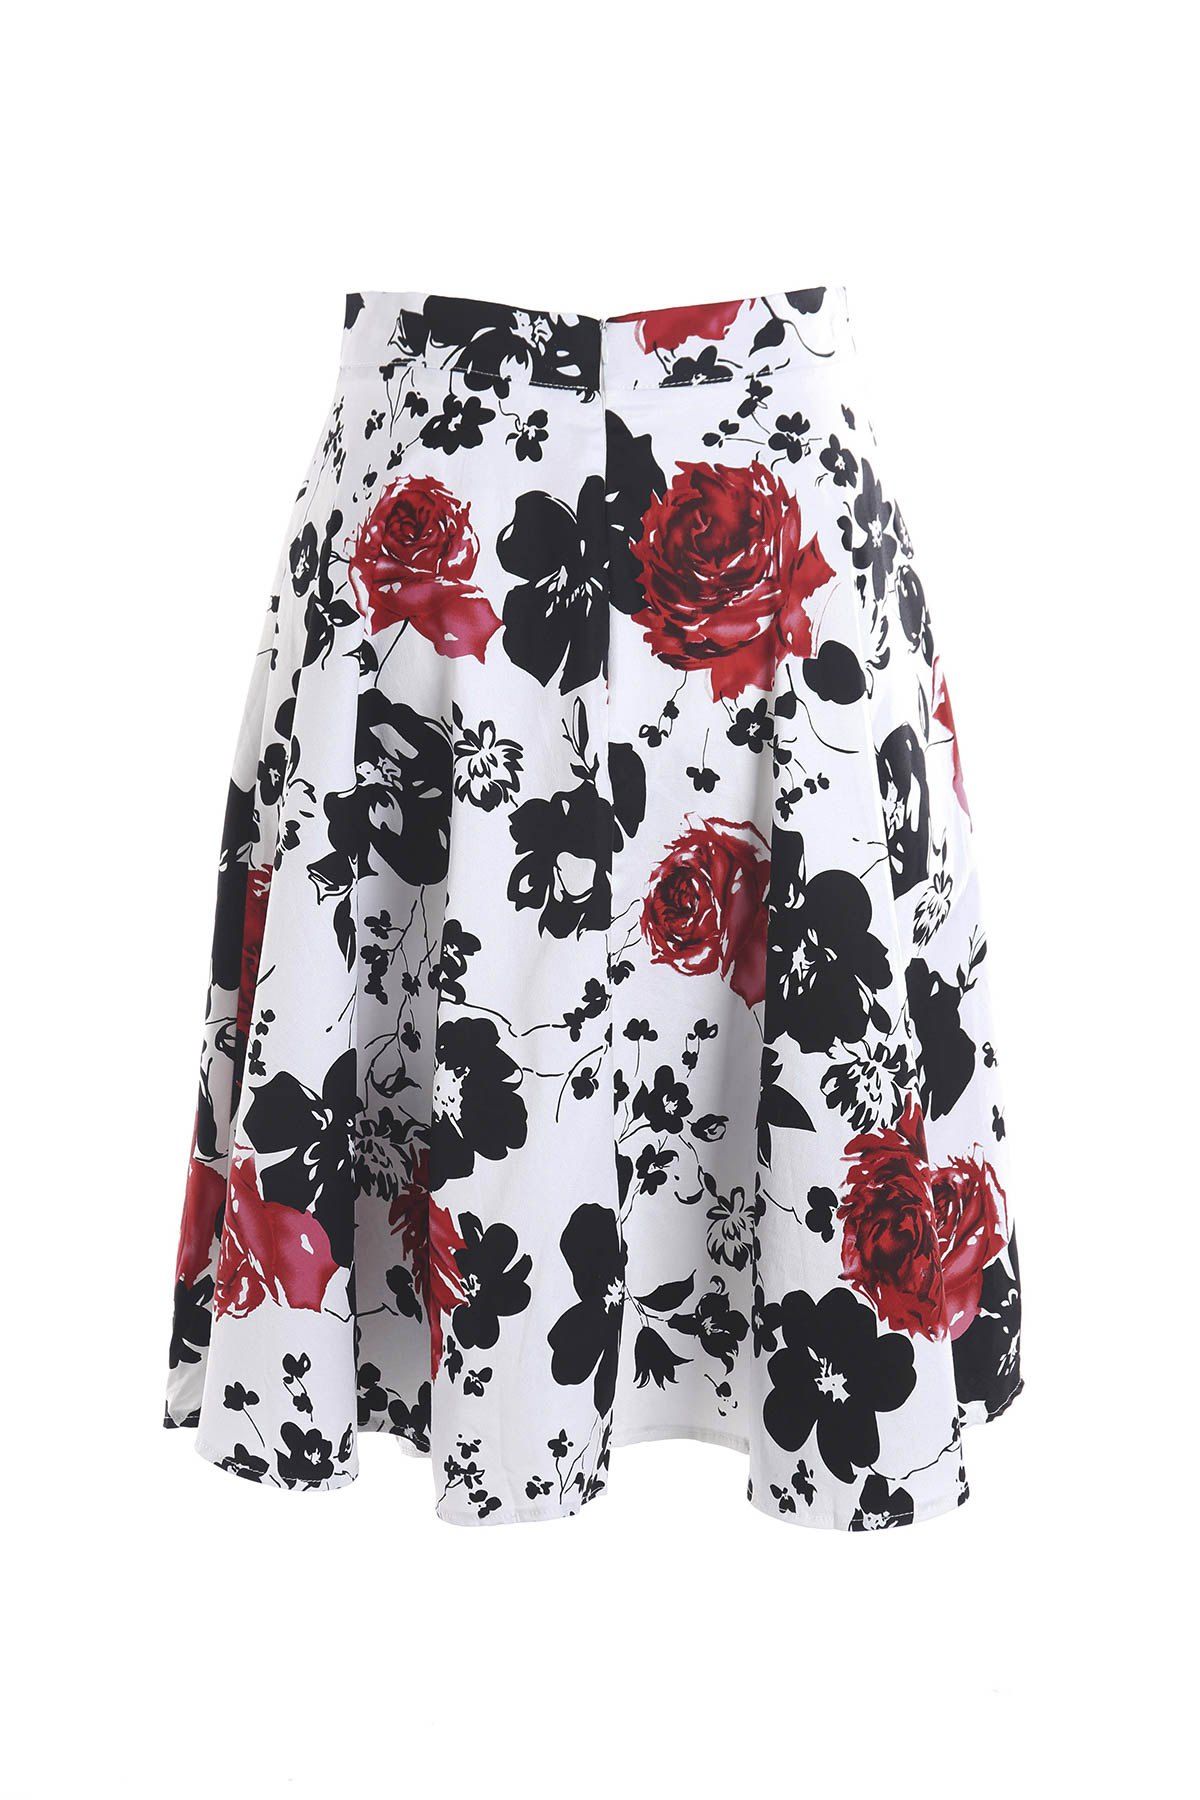 [27% OFF] Vintage Style High-Waisted Floral Print A-Line Women's Skirt